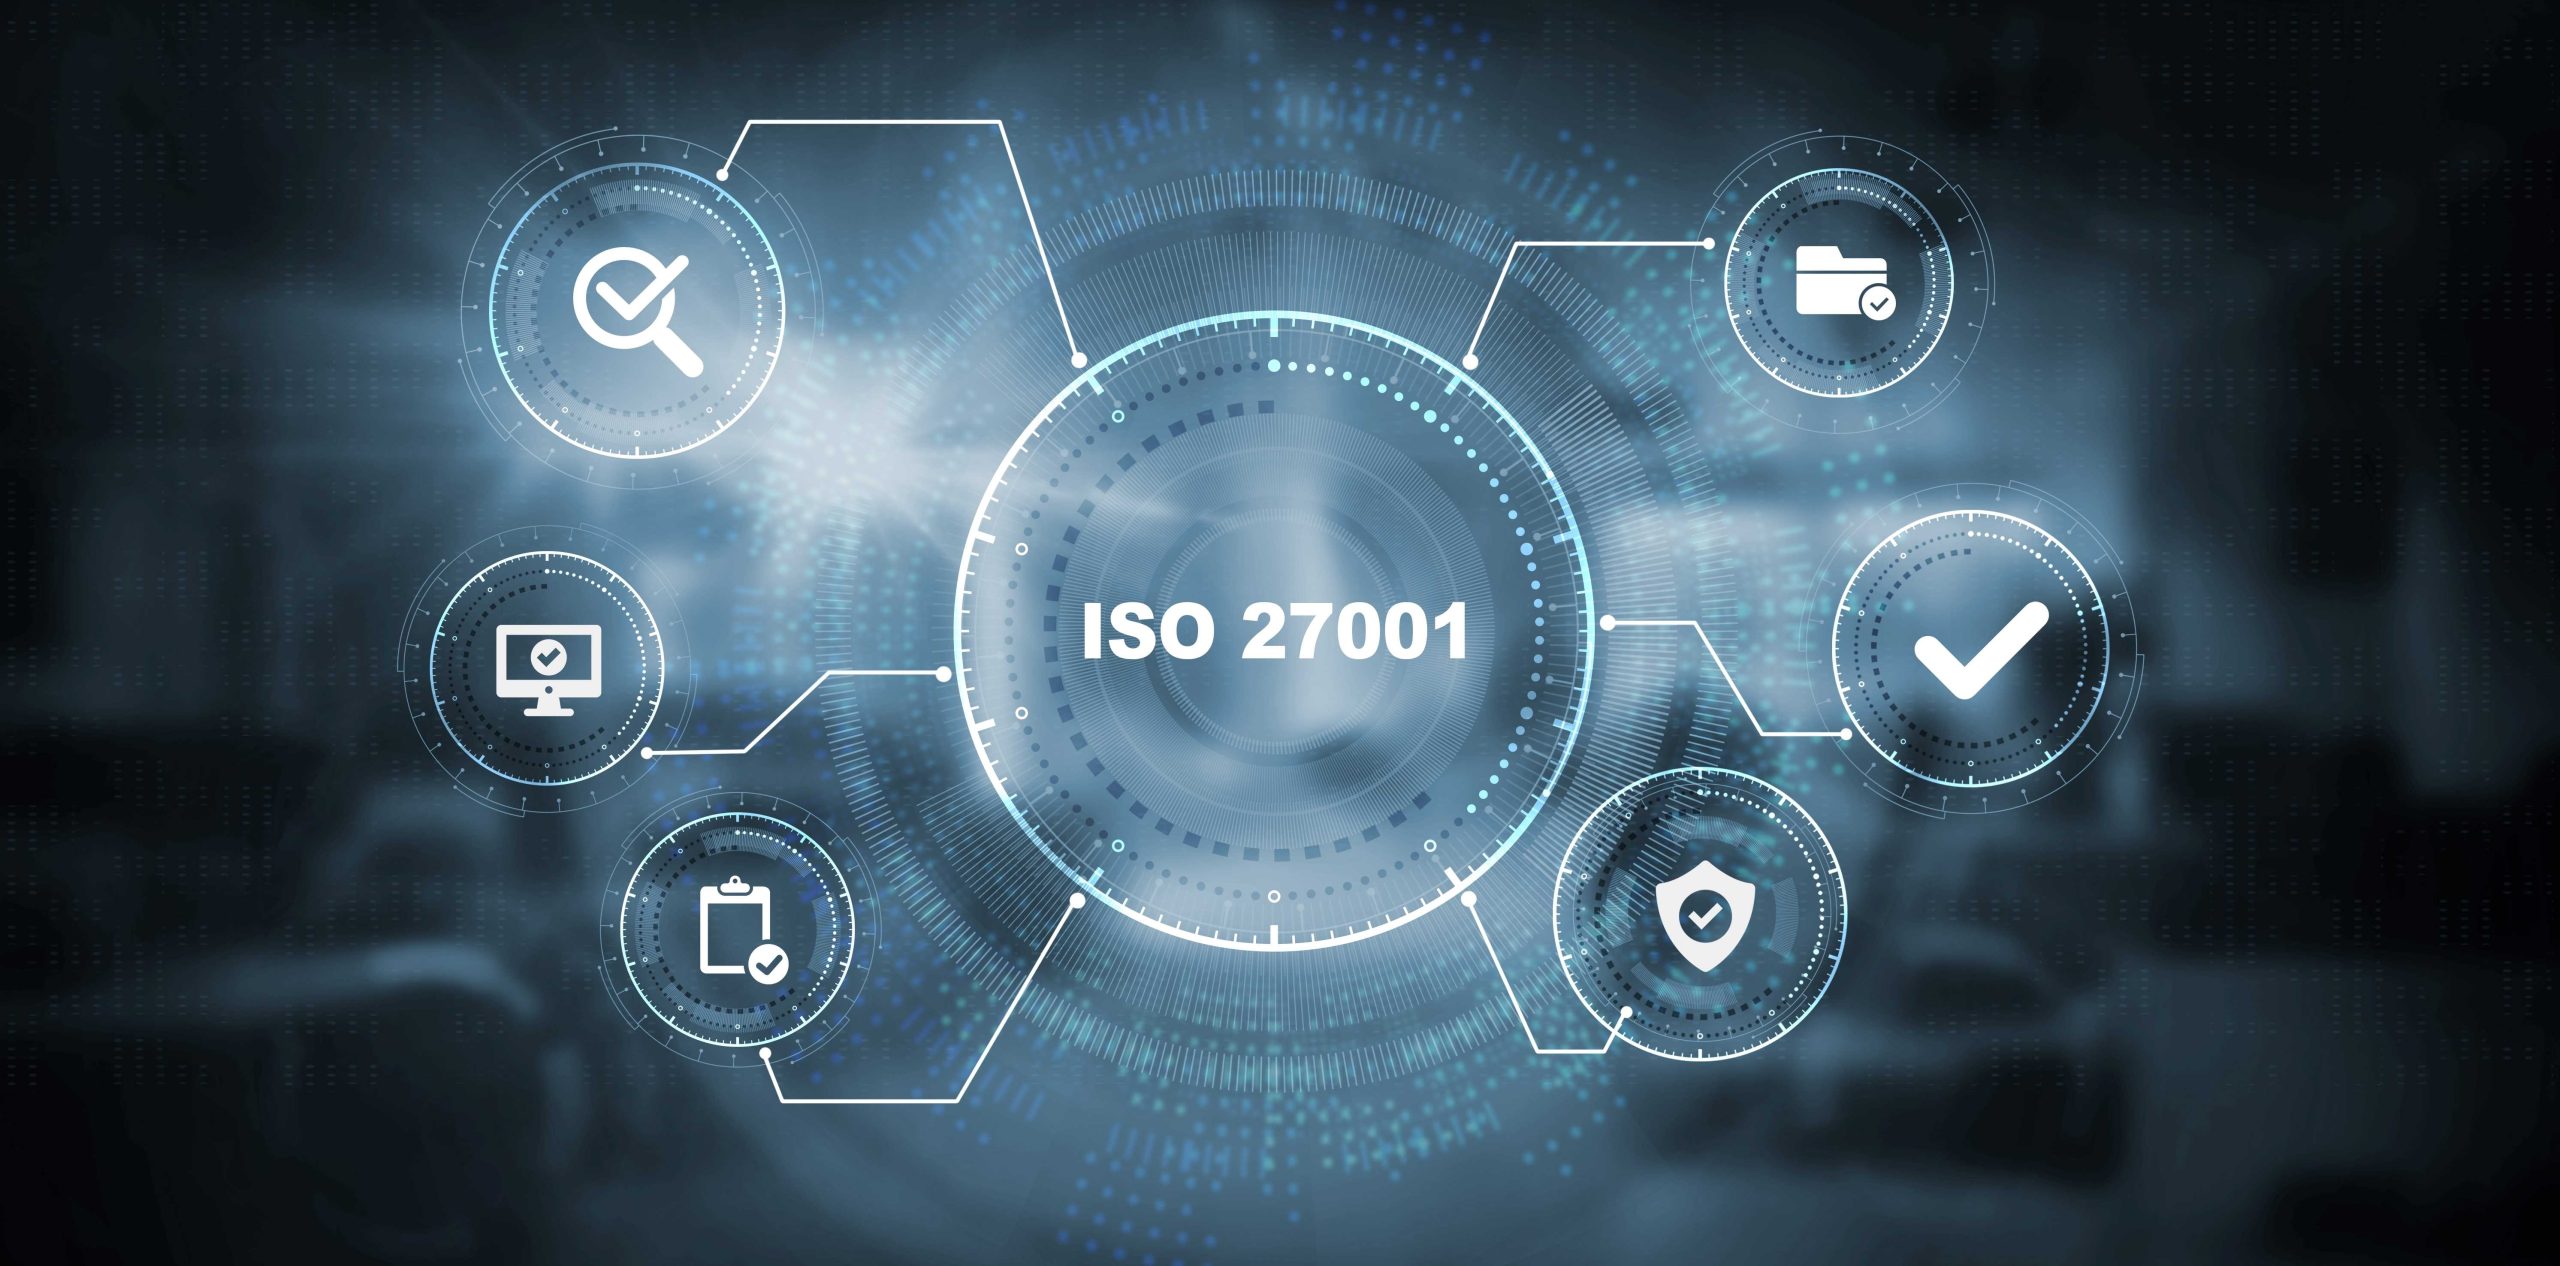 ISO/IEC 27001: What Has Changed and What Does It Mean for Your Company ...